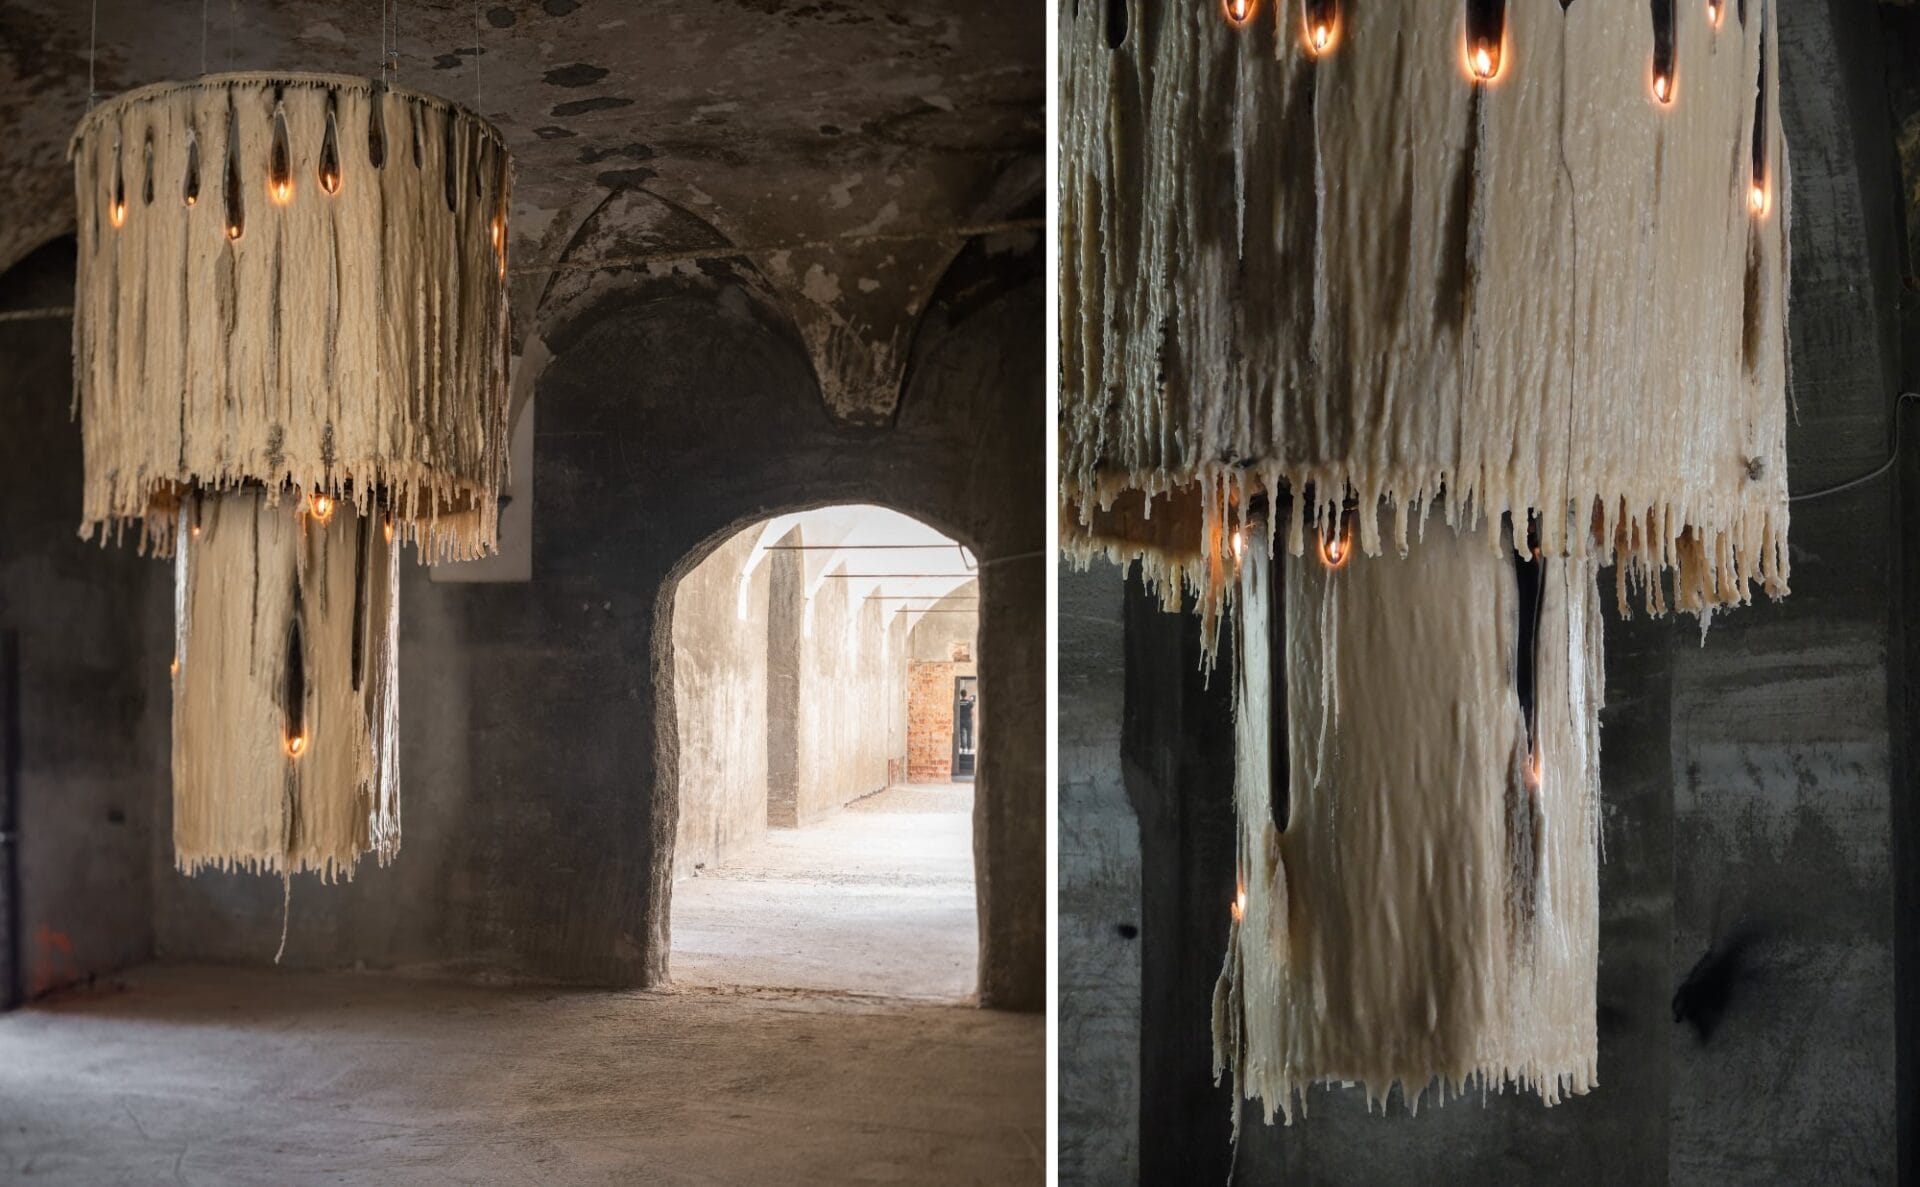 left: a chandelier like sculpture covered in lit candles. right: a detail of the sculpture showing dripping wax